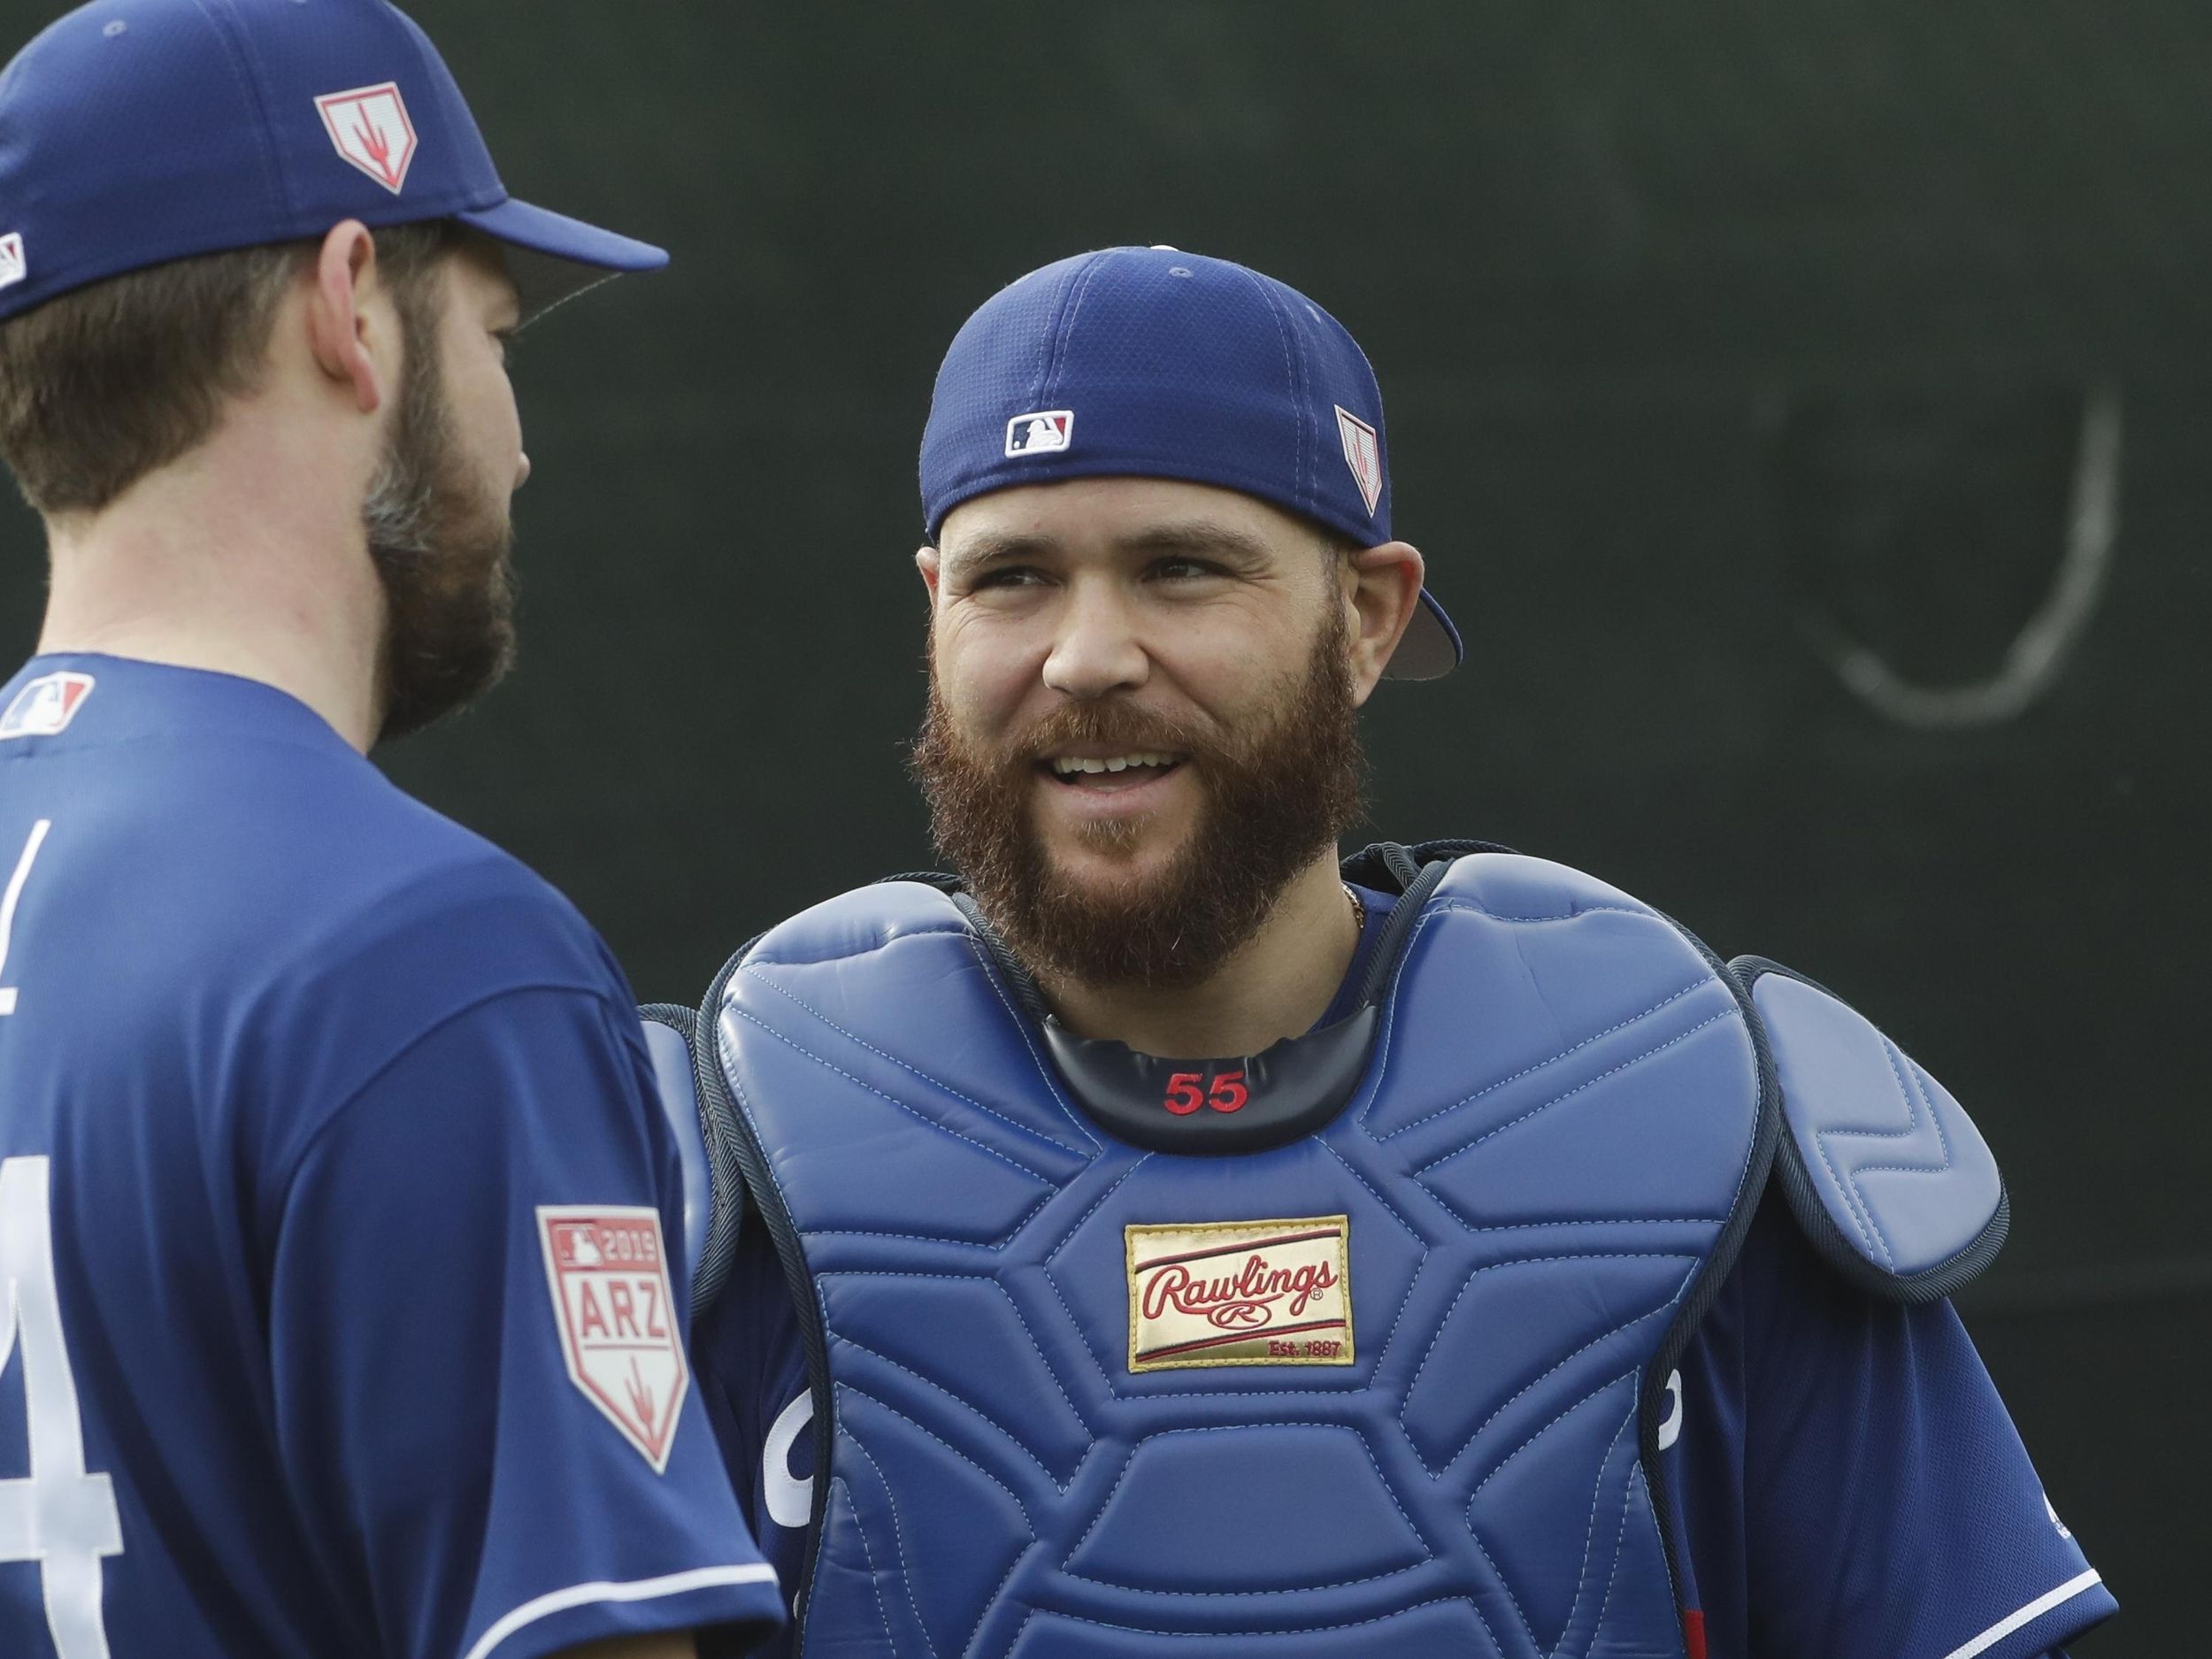 Russell Martin reunited with Clayton Kershaw, connecting with new